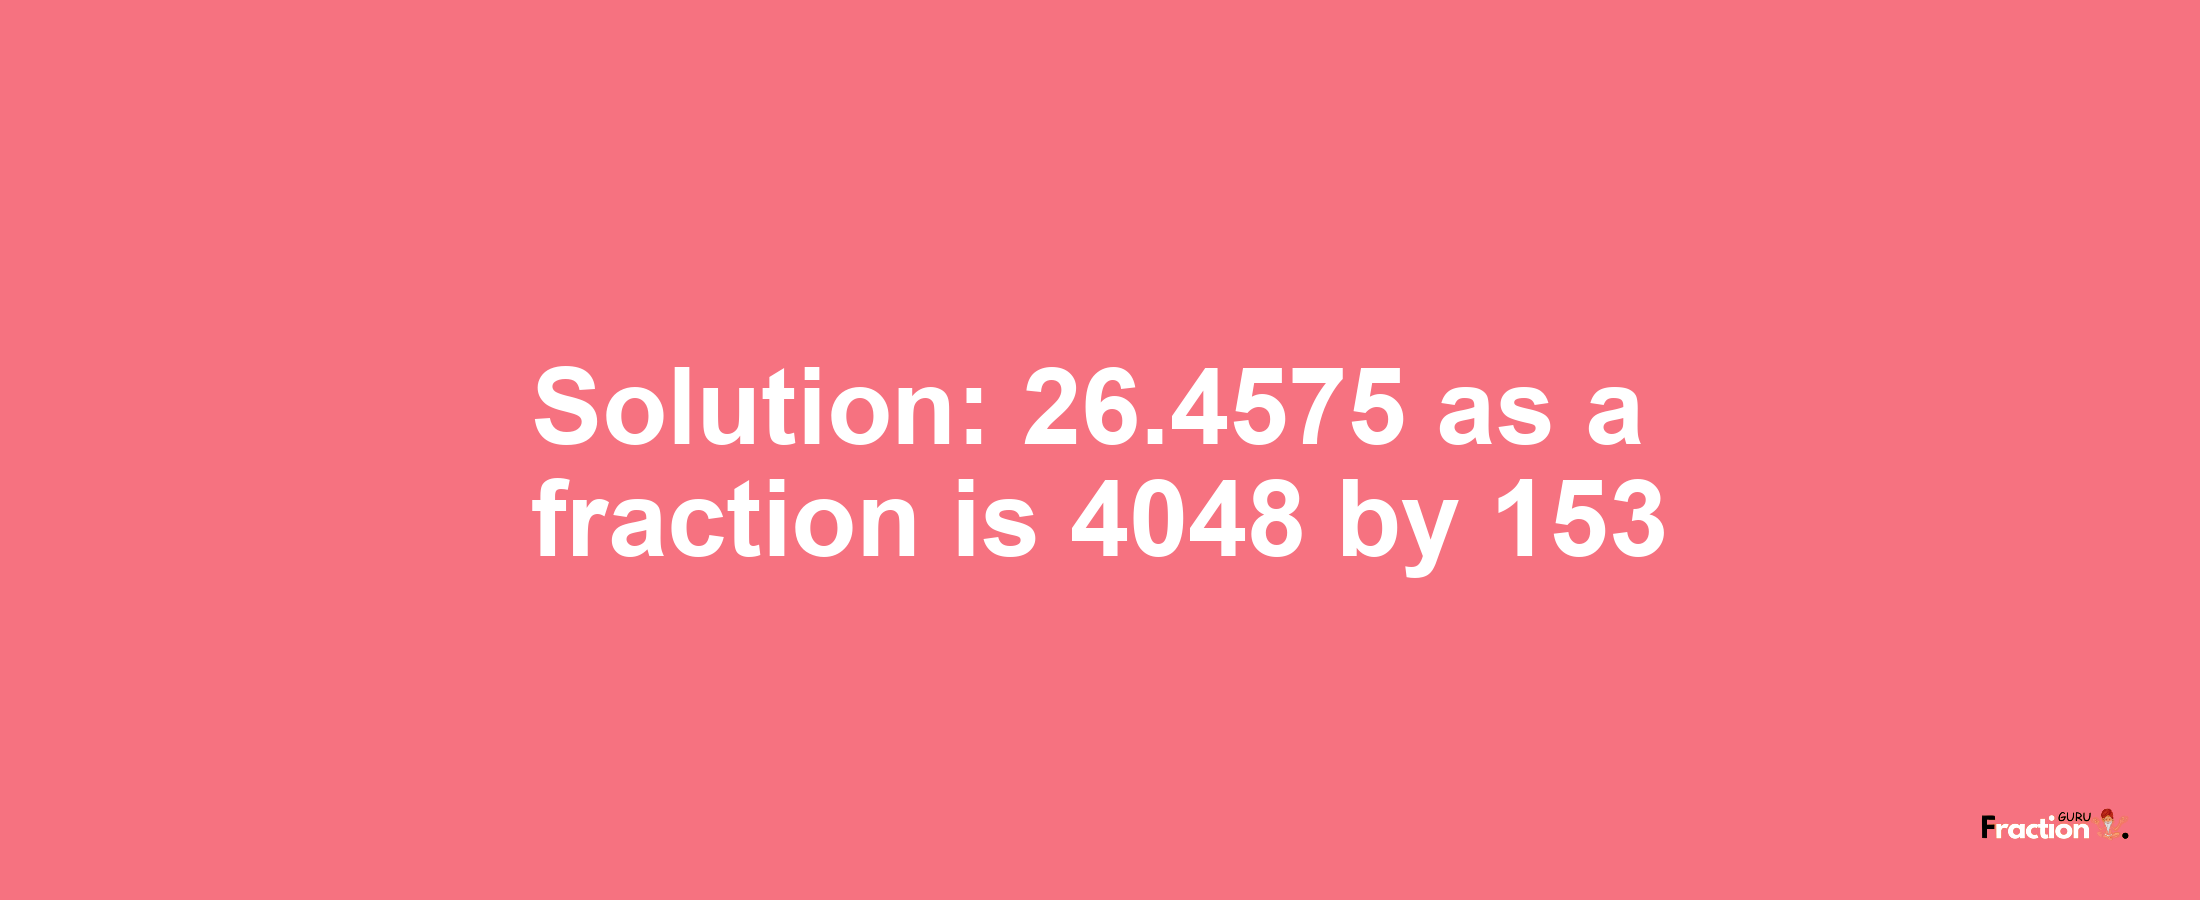 Solution:26.4575 as a fraction is 4048/153